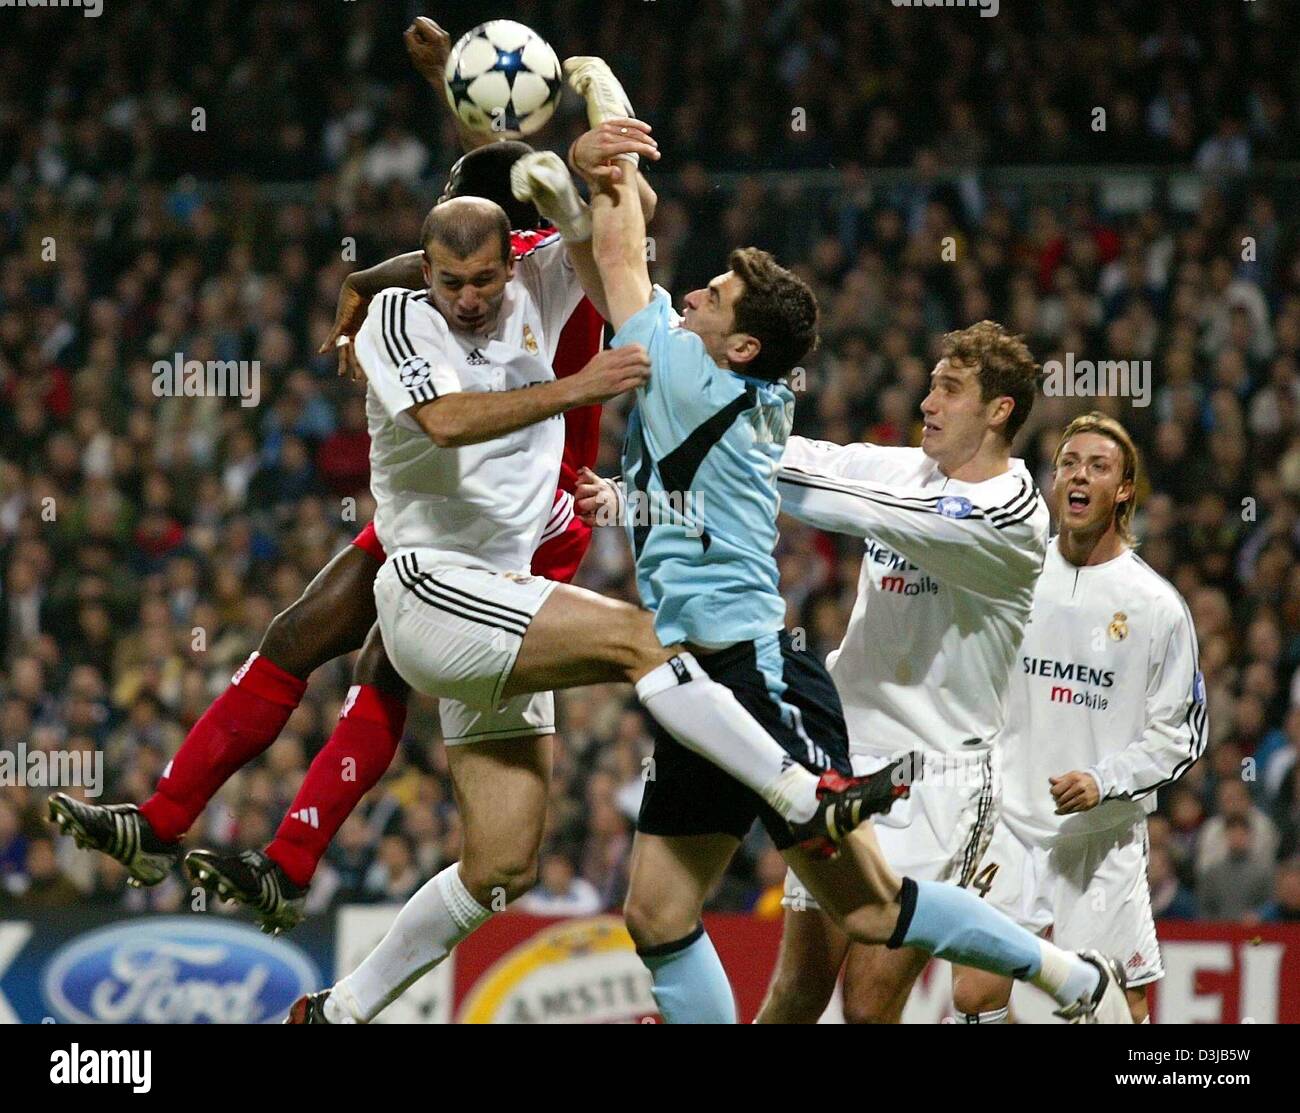 (dpa) Real Madrid players Zinedine Zidane (left), goalie Iker Casillas, Santiago Solari and Guti (right) defend against FC Bayern Munich player Sammy Kofour (covered) during the  Champions League 1/8 final second leg match at the Santiago Bernabeu-Stadium in Madrid on Wednesday, 10 March 2004. Real Madrid won 1:0 and moves on to the next round. Stock Photo